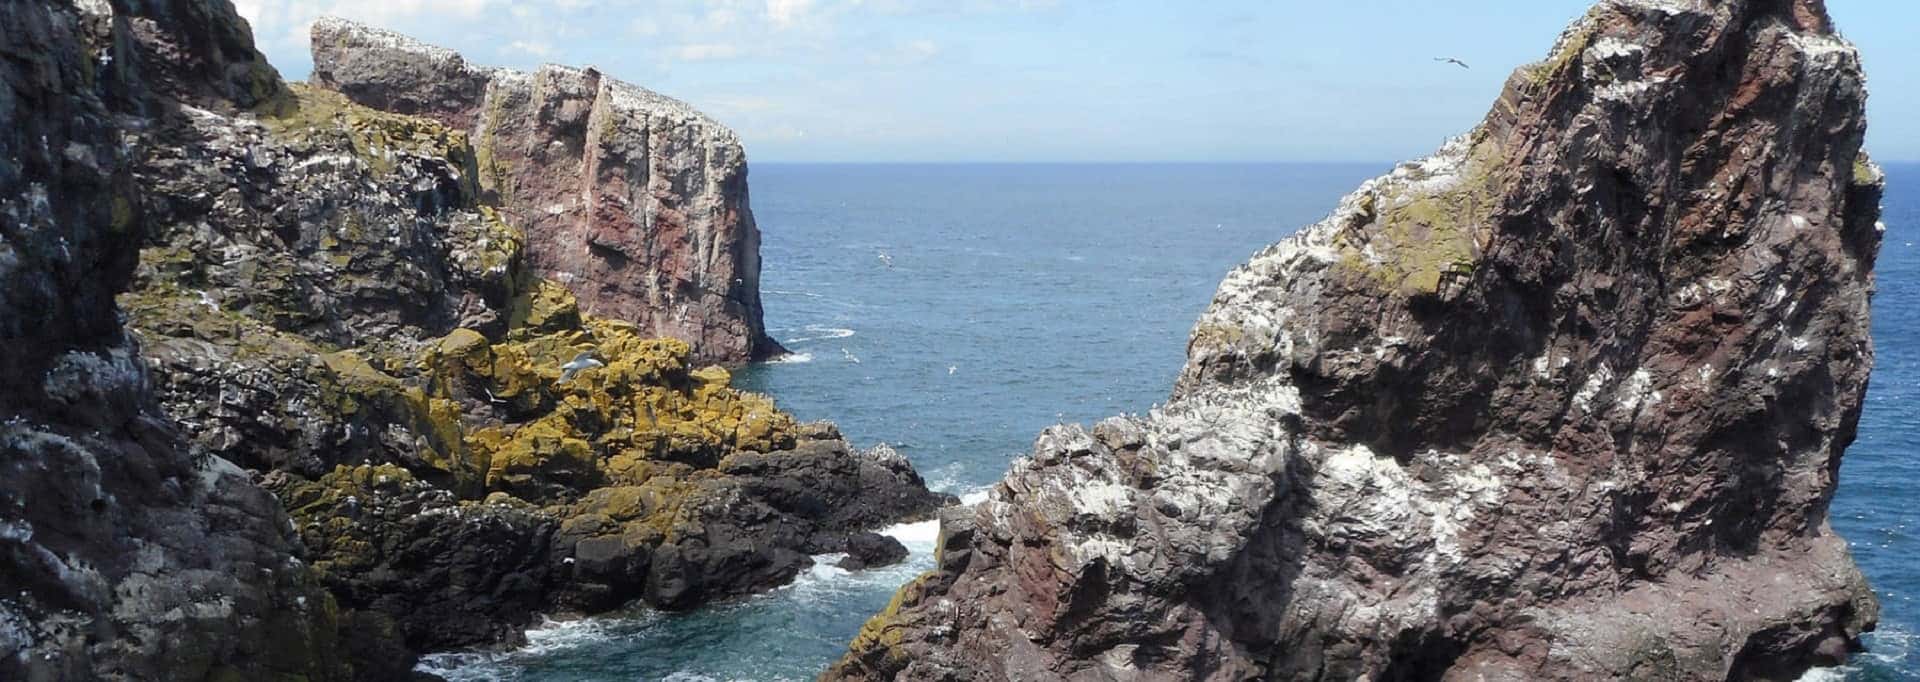 St Abb's Head Nature Reserve in UK